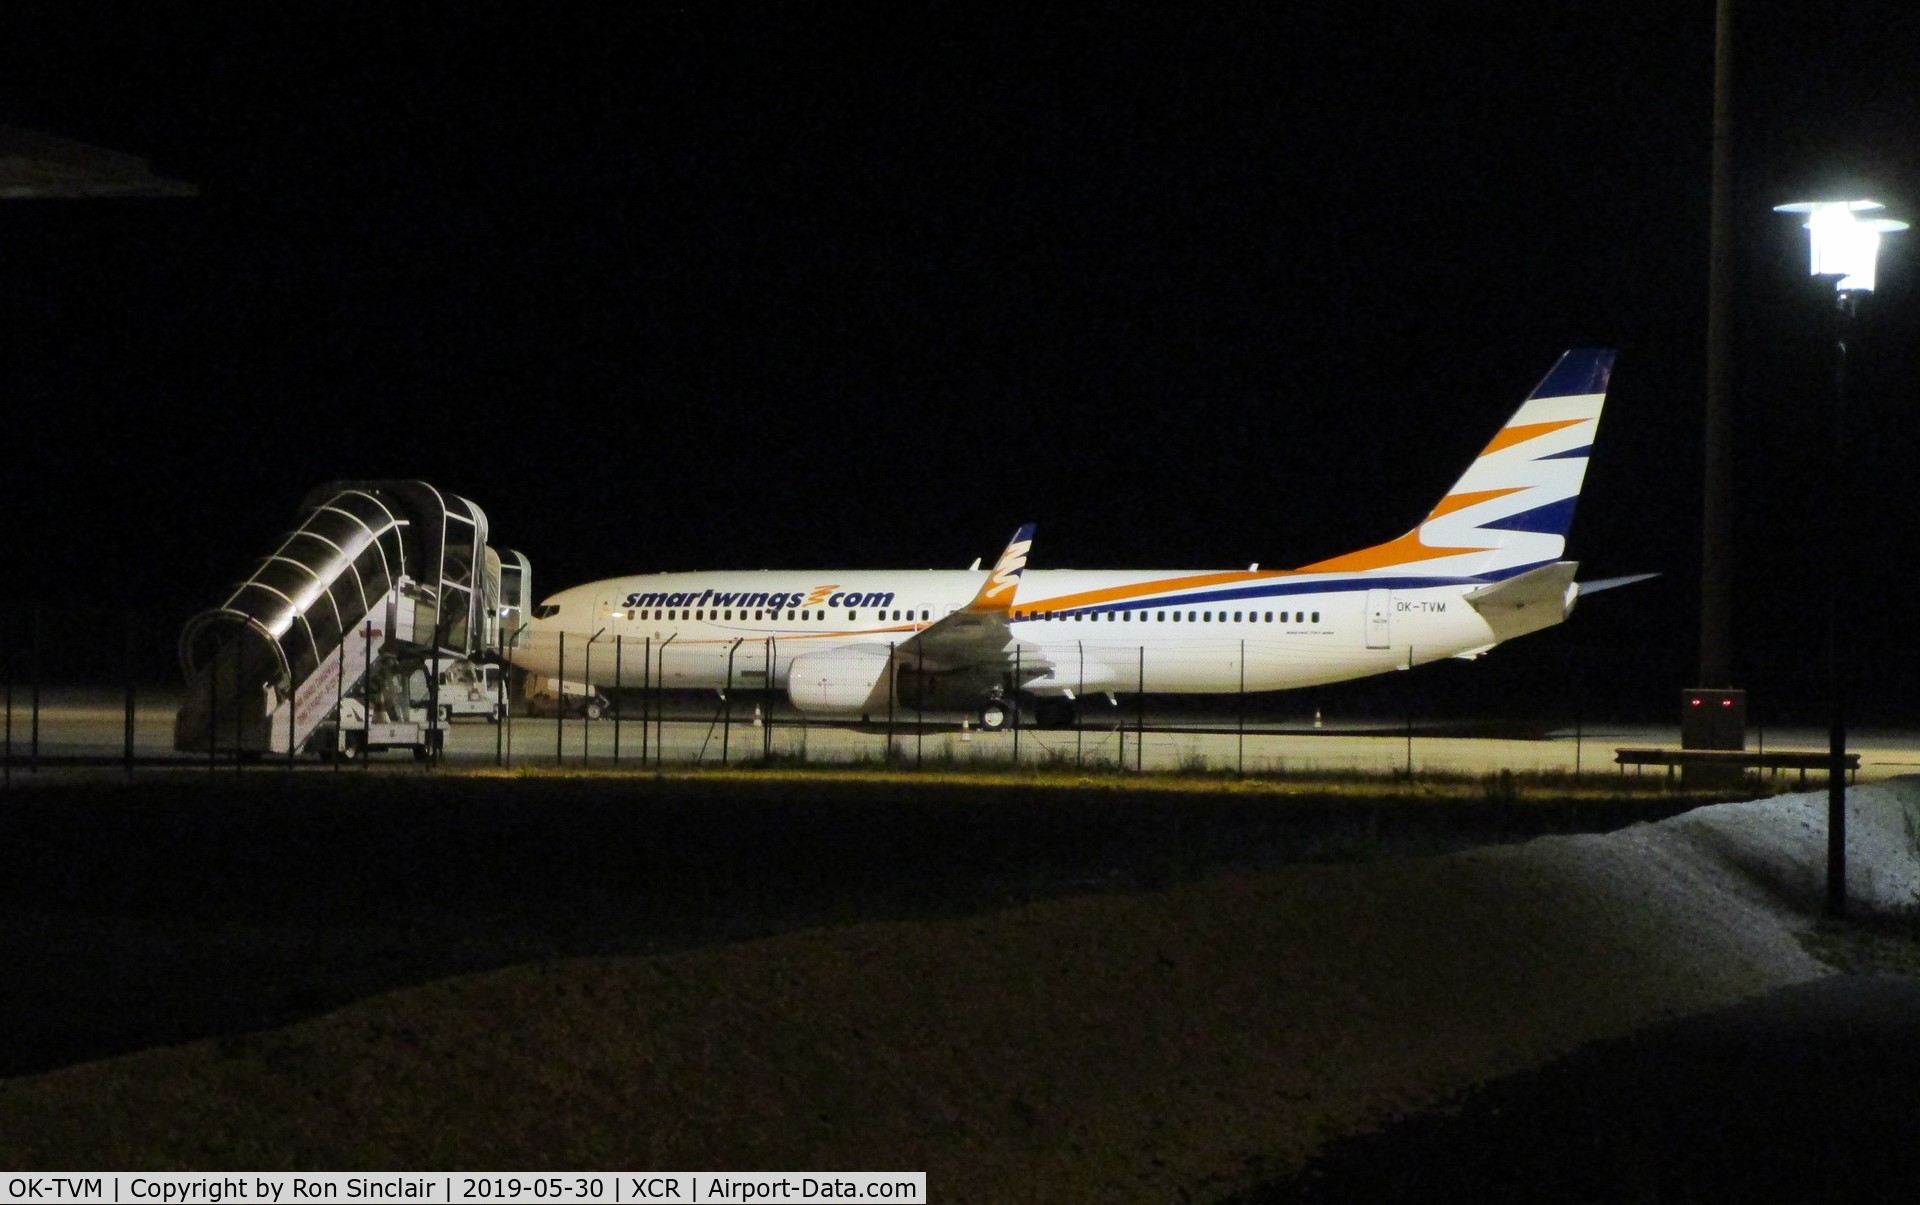 OK-TVM, 2010 Boeing 737-8FN C/N 37077, parked overnight at Vatry for 06h15 flight to Funchal on 30 May 2019